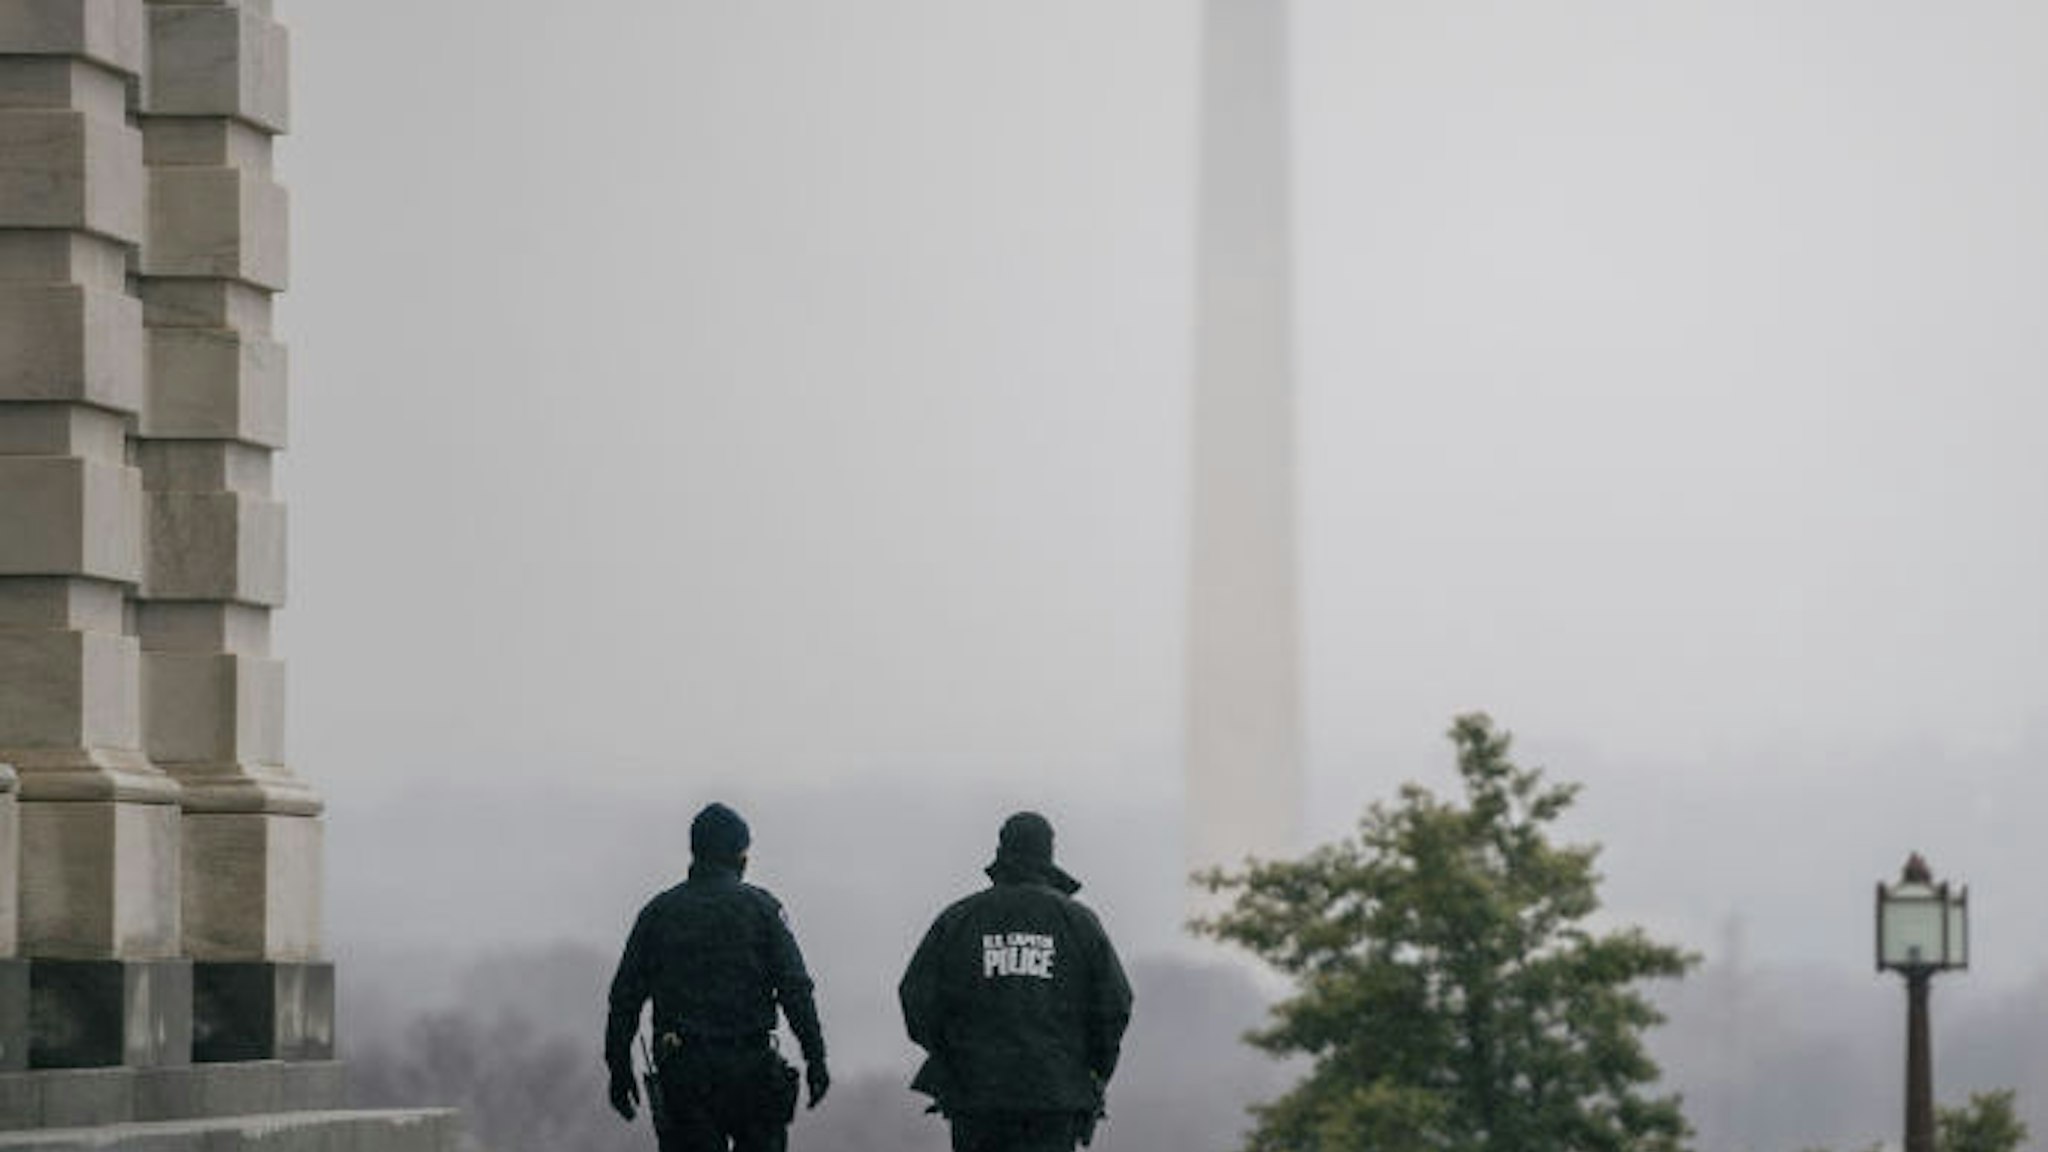 WASHINGTON, DC - FEBRUARY 13: Capitol Police officers patrol the U.S. Capitol grounds following the conclusion of the second impeachment trial of former President Donald Trump on February 13, 2021 in Washington, DC. The Senate voted 57-43 to acquit Trump. (Photo by Brandon Bell/Getty Images)